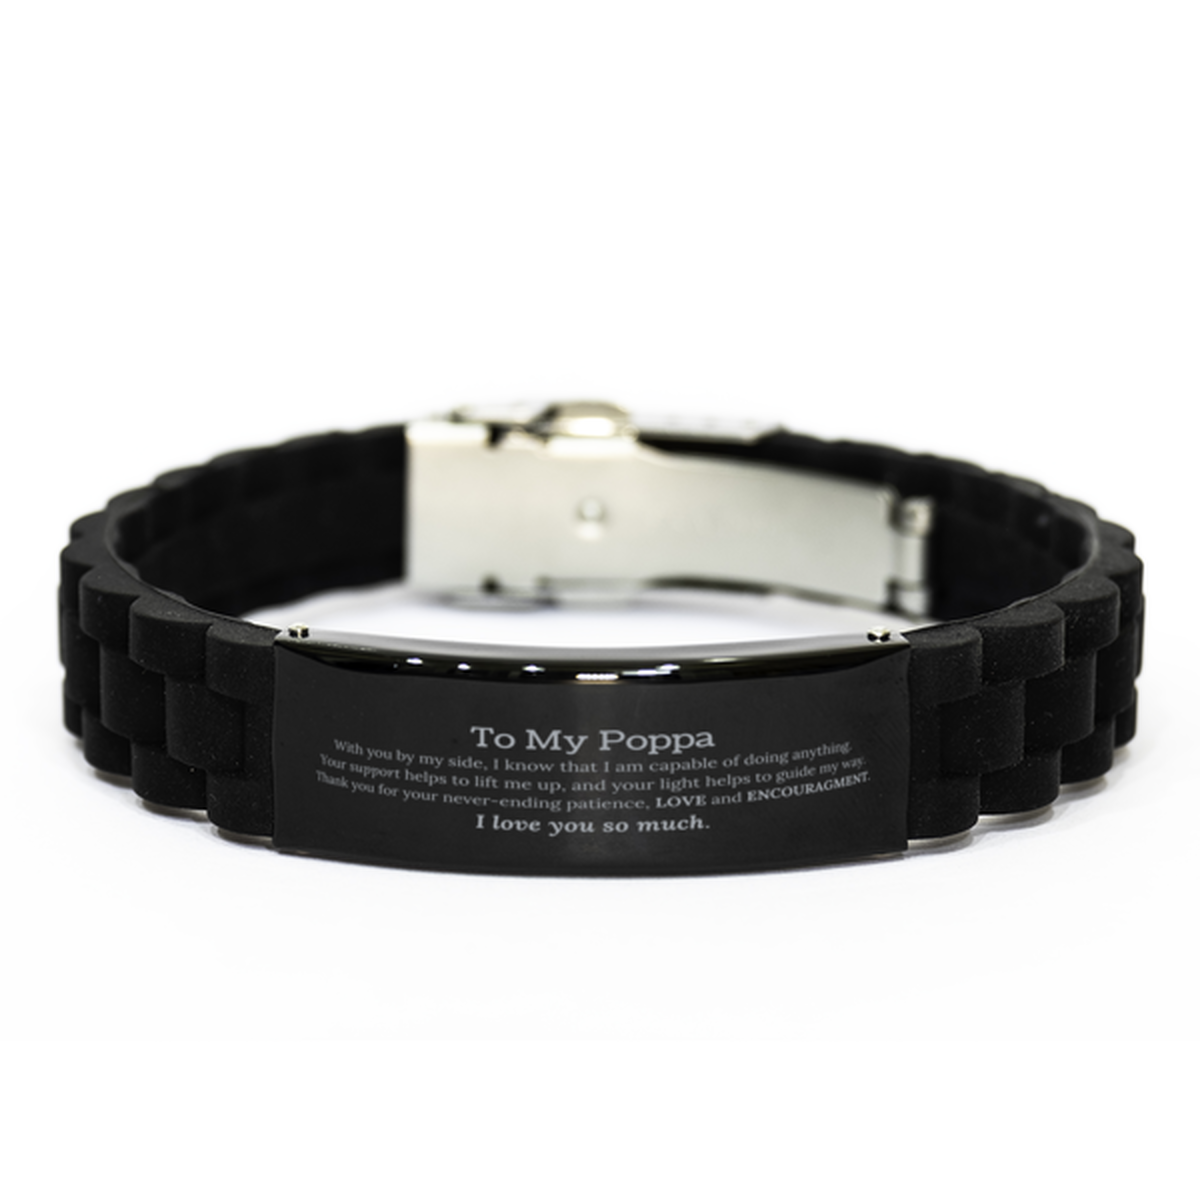 Appreciation Poppa Black Glidelock Clasp Bracelet Gifts, To My Poppa Birthday Christmas Wedding Keepsake Gifts for Poppa With you by my side, I know that I am capable of doing anything. I love you so much